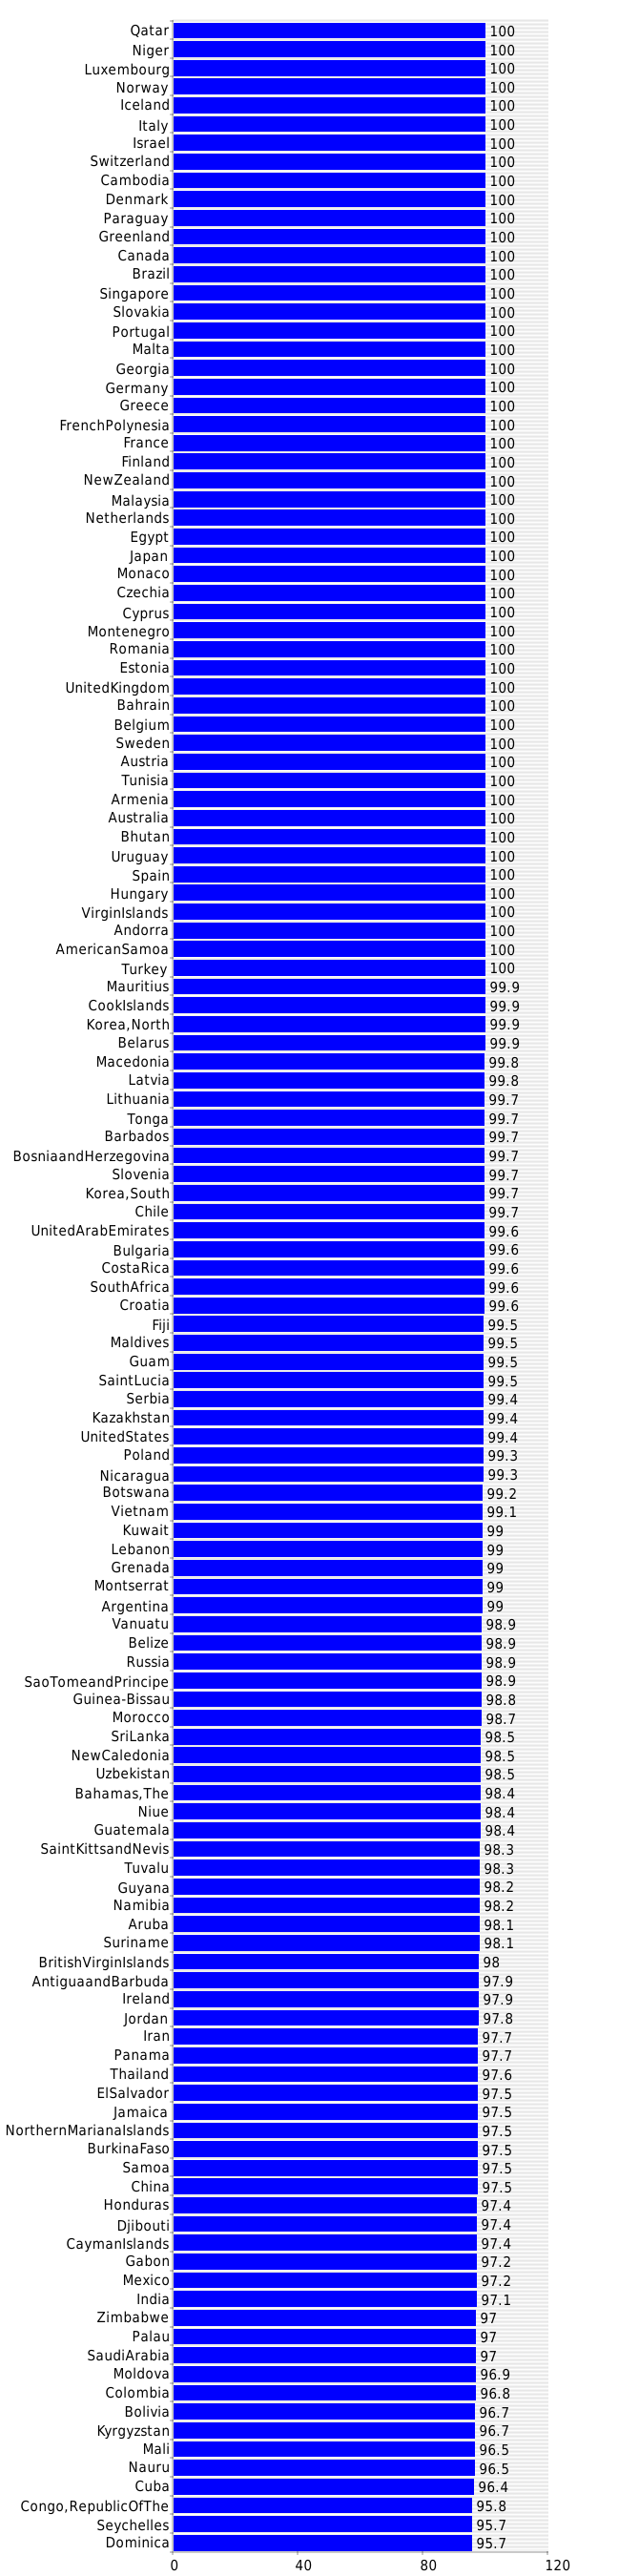  Drinking water source - improved - urban 2019 country comparisons, ranks, by Rank 